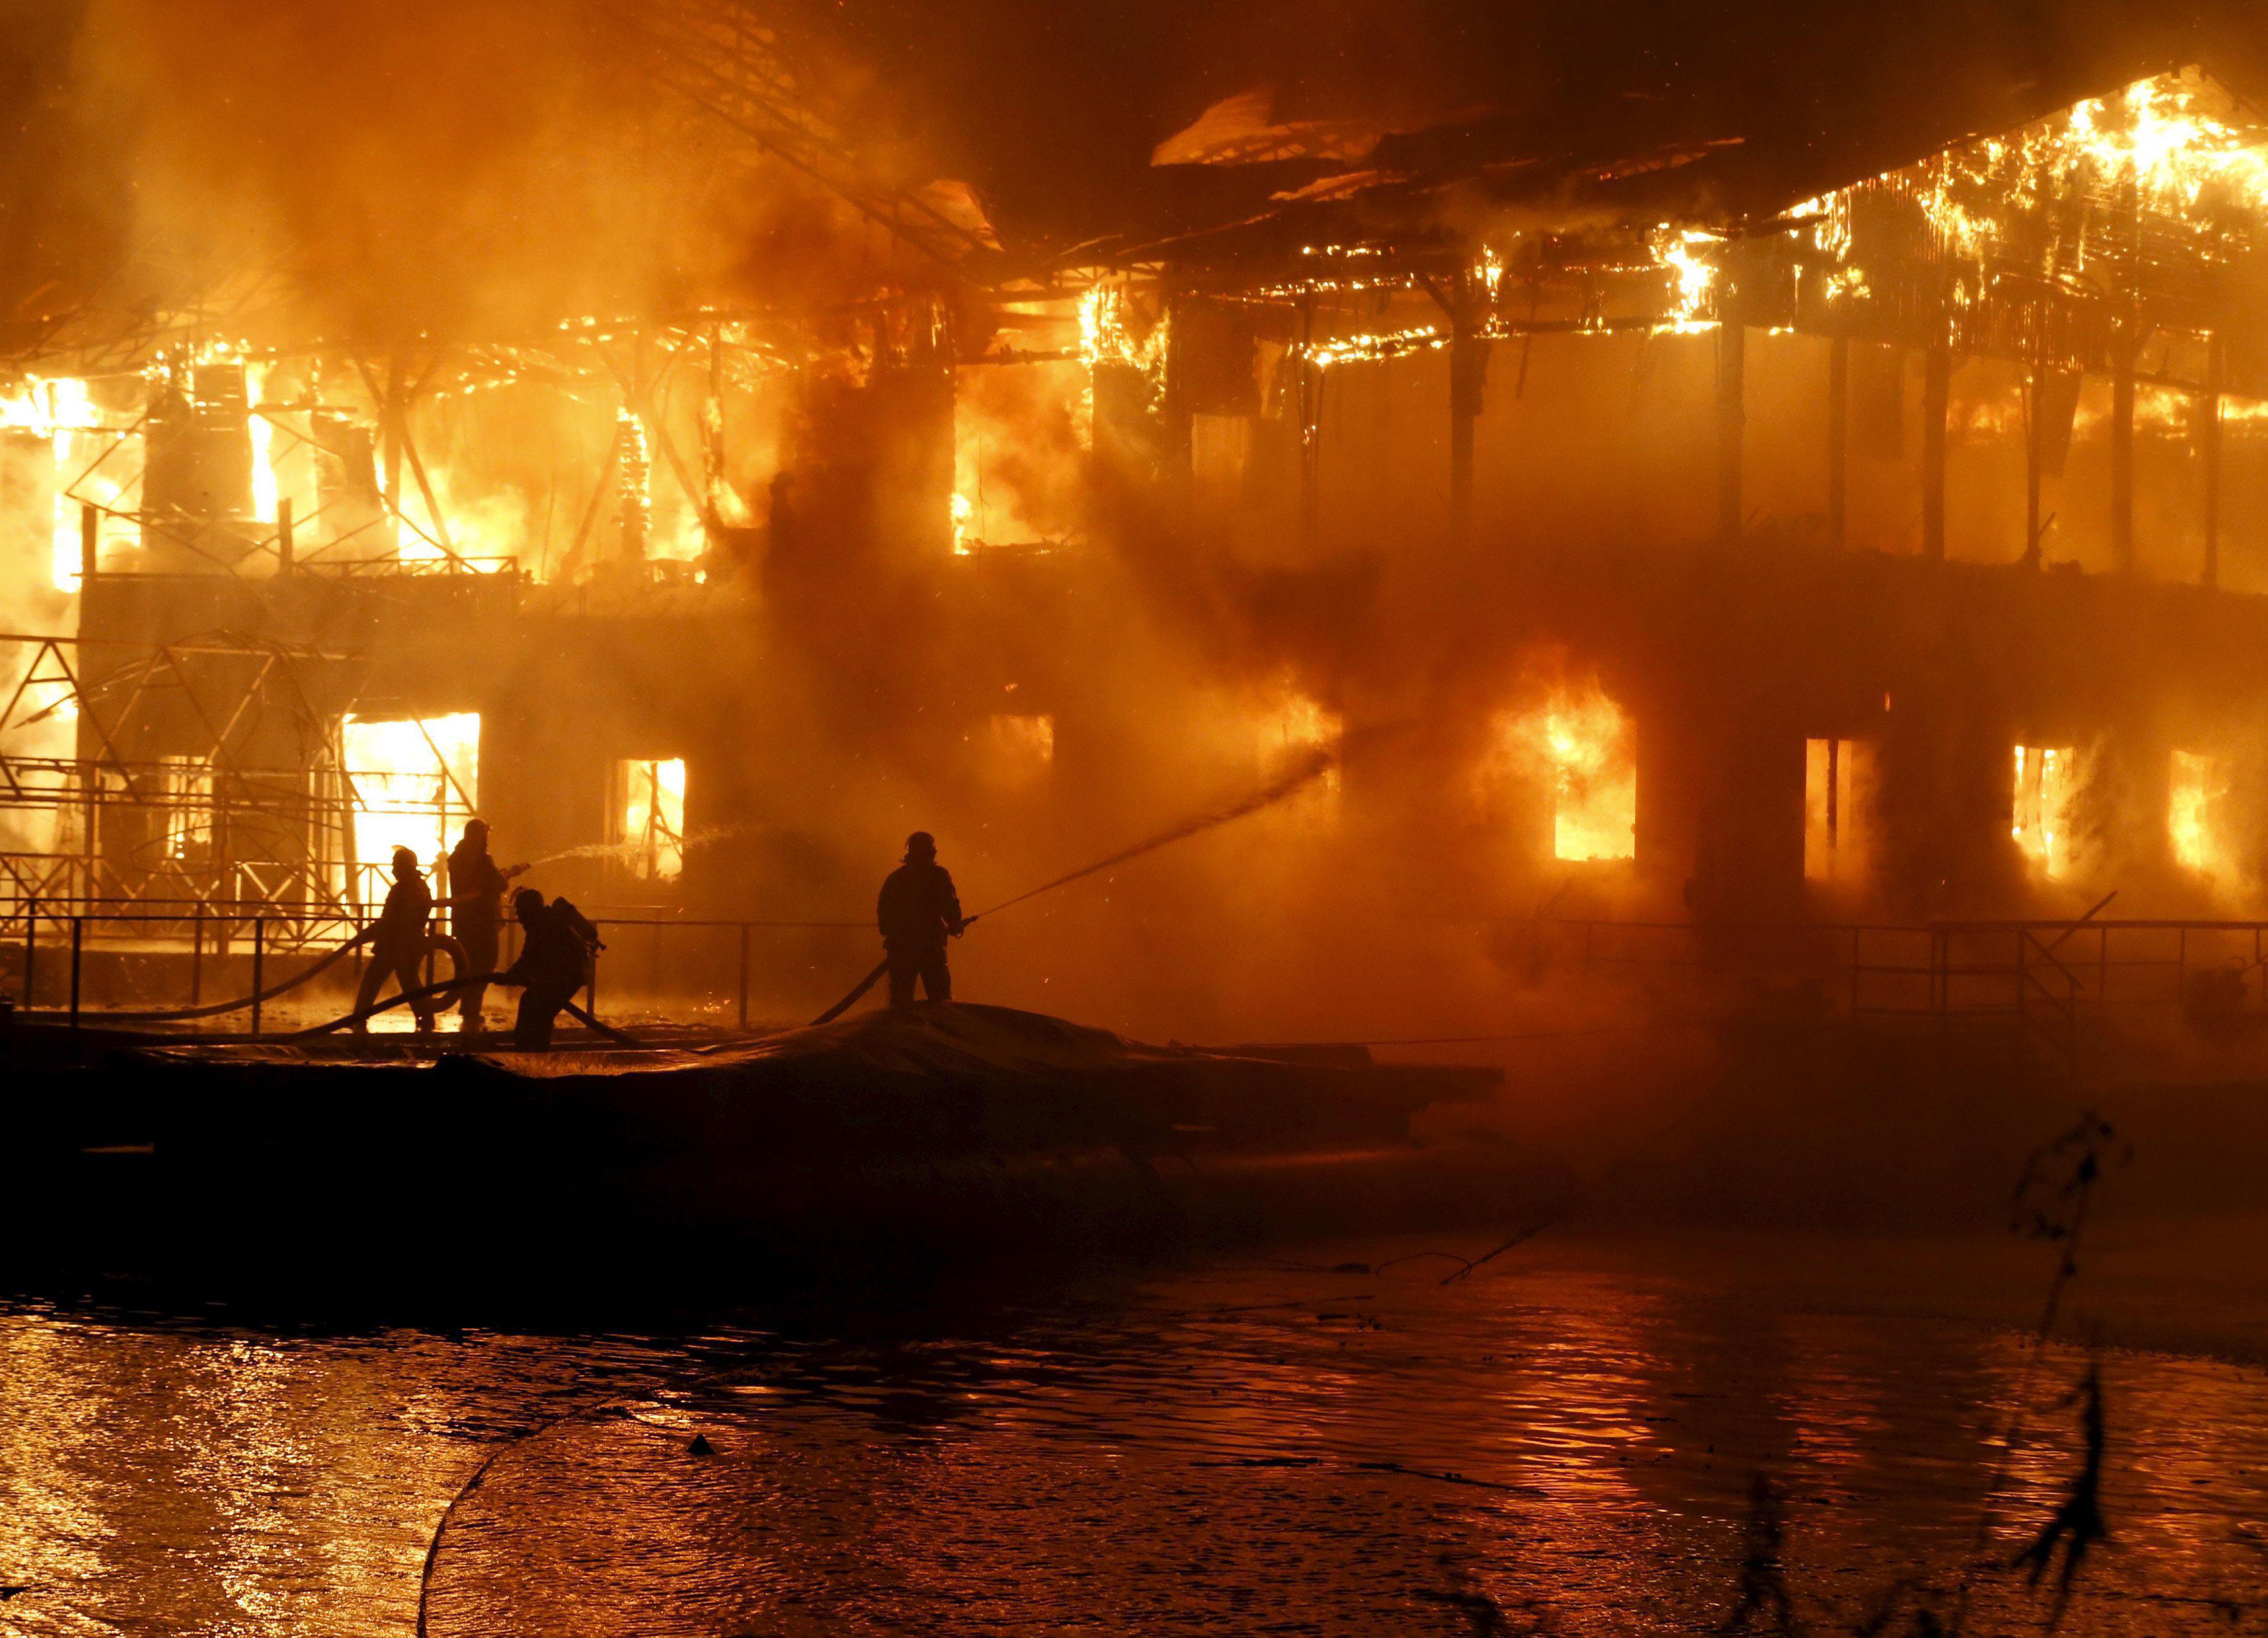 Firefighters work to extinguish fire at floating restaurant in Kiev